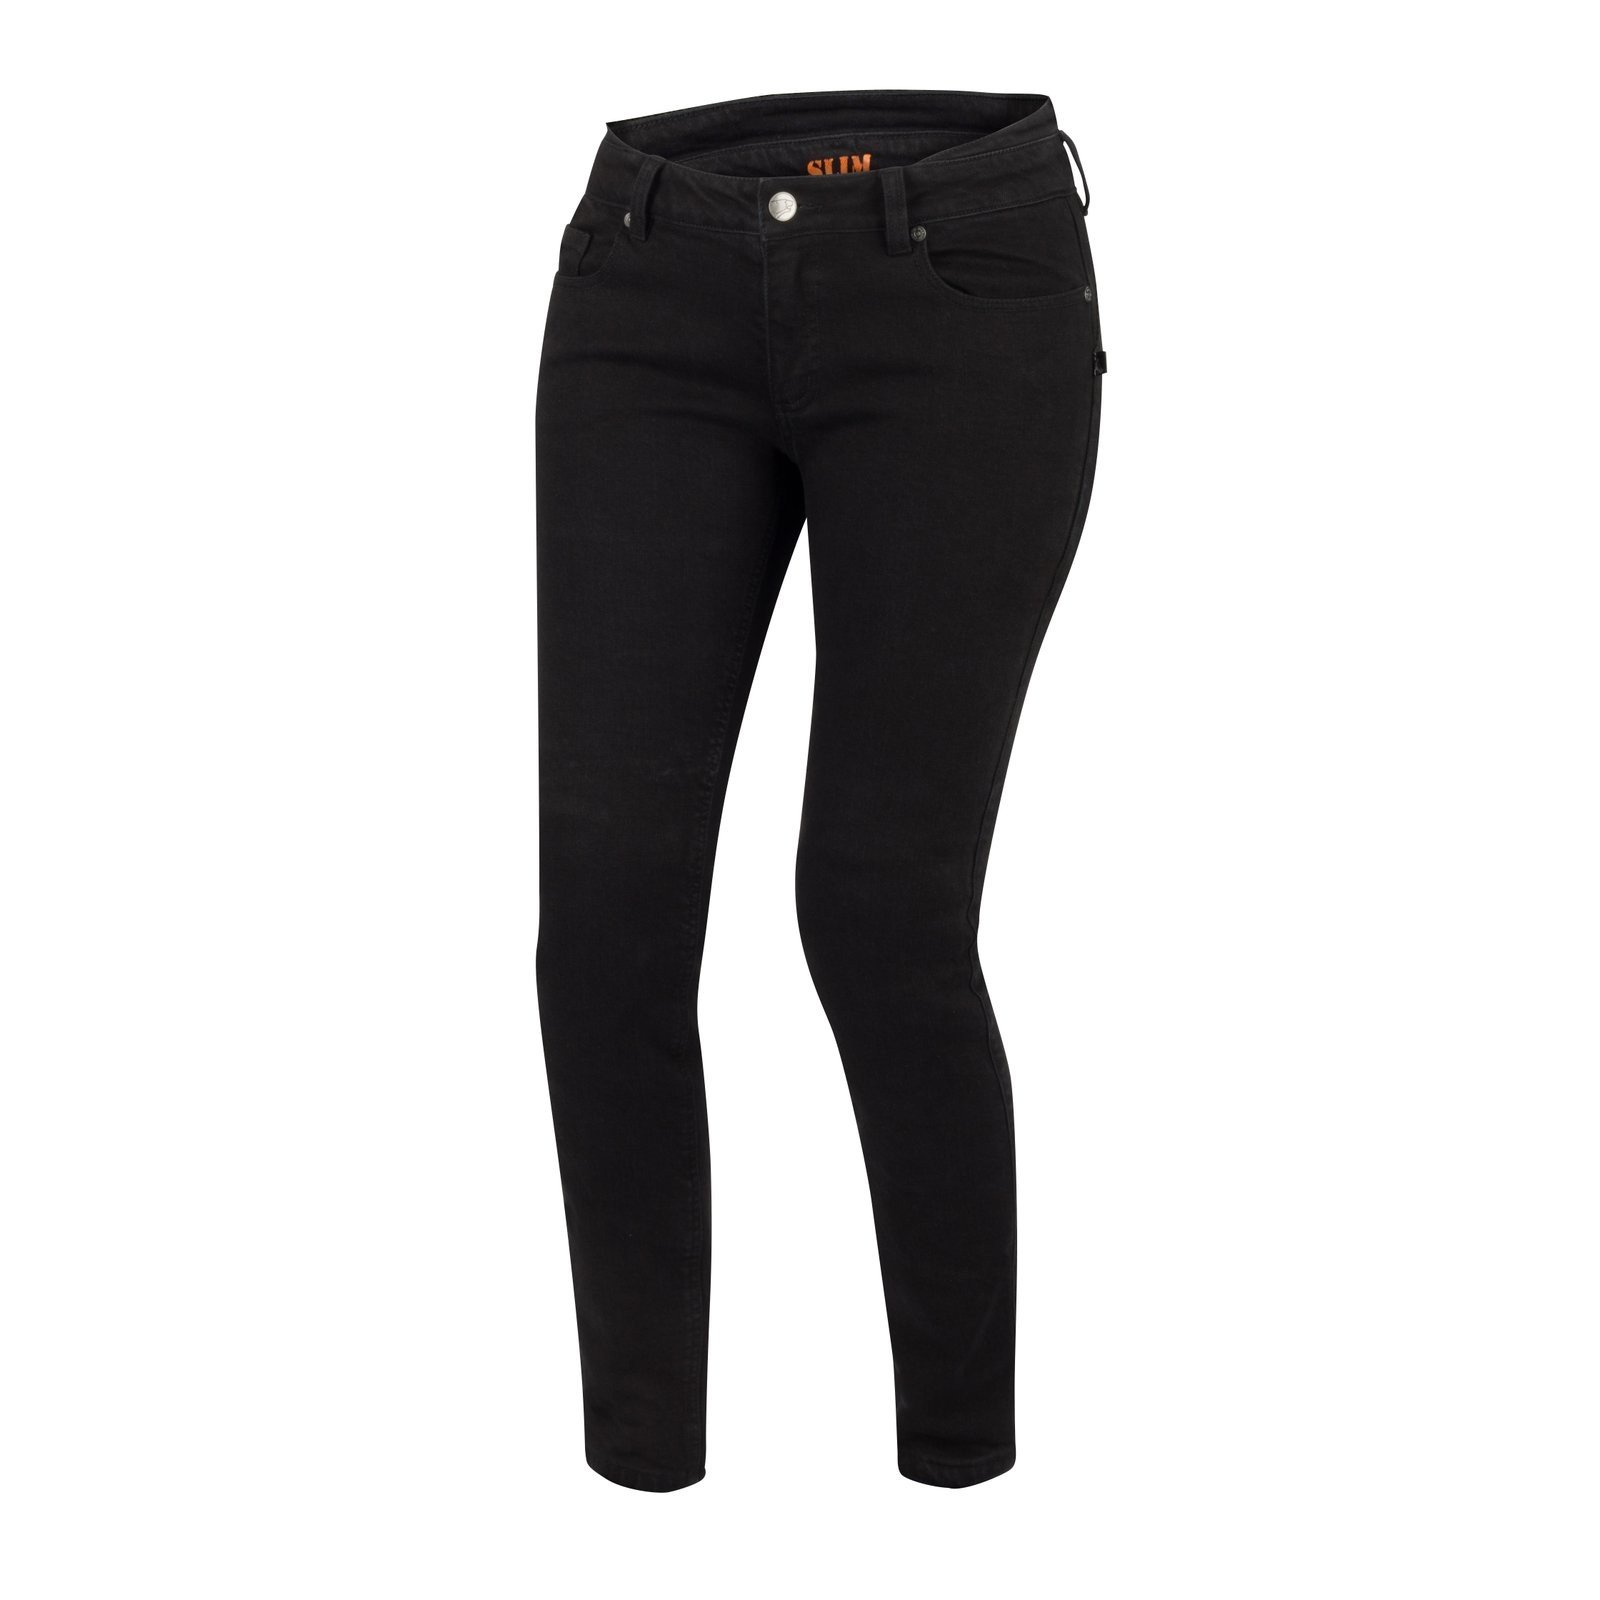 Image of Bering Patricia Lady Black Pants Size T4 ID 3660815157190